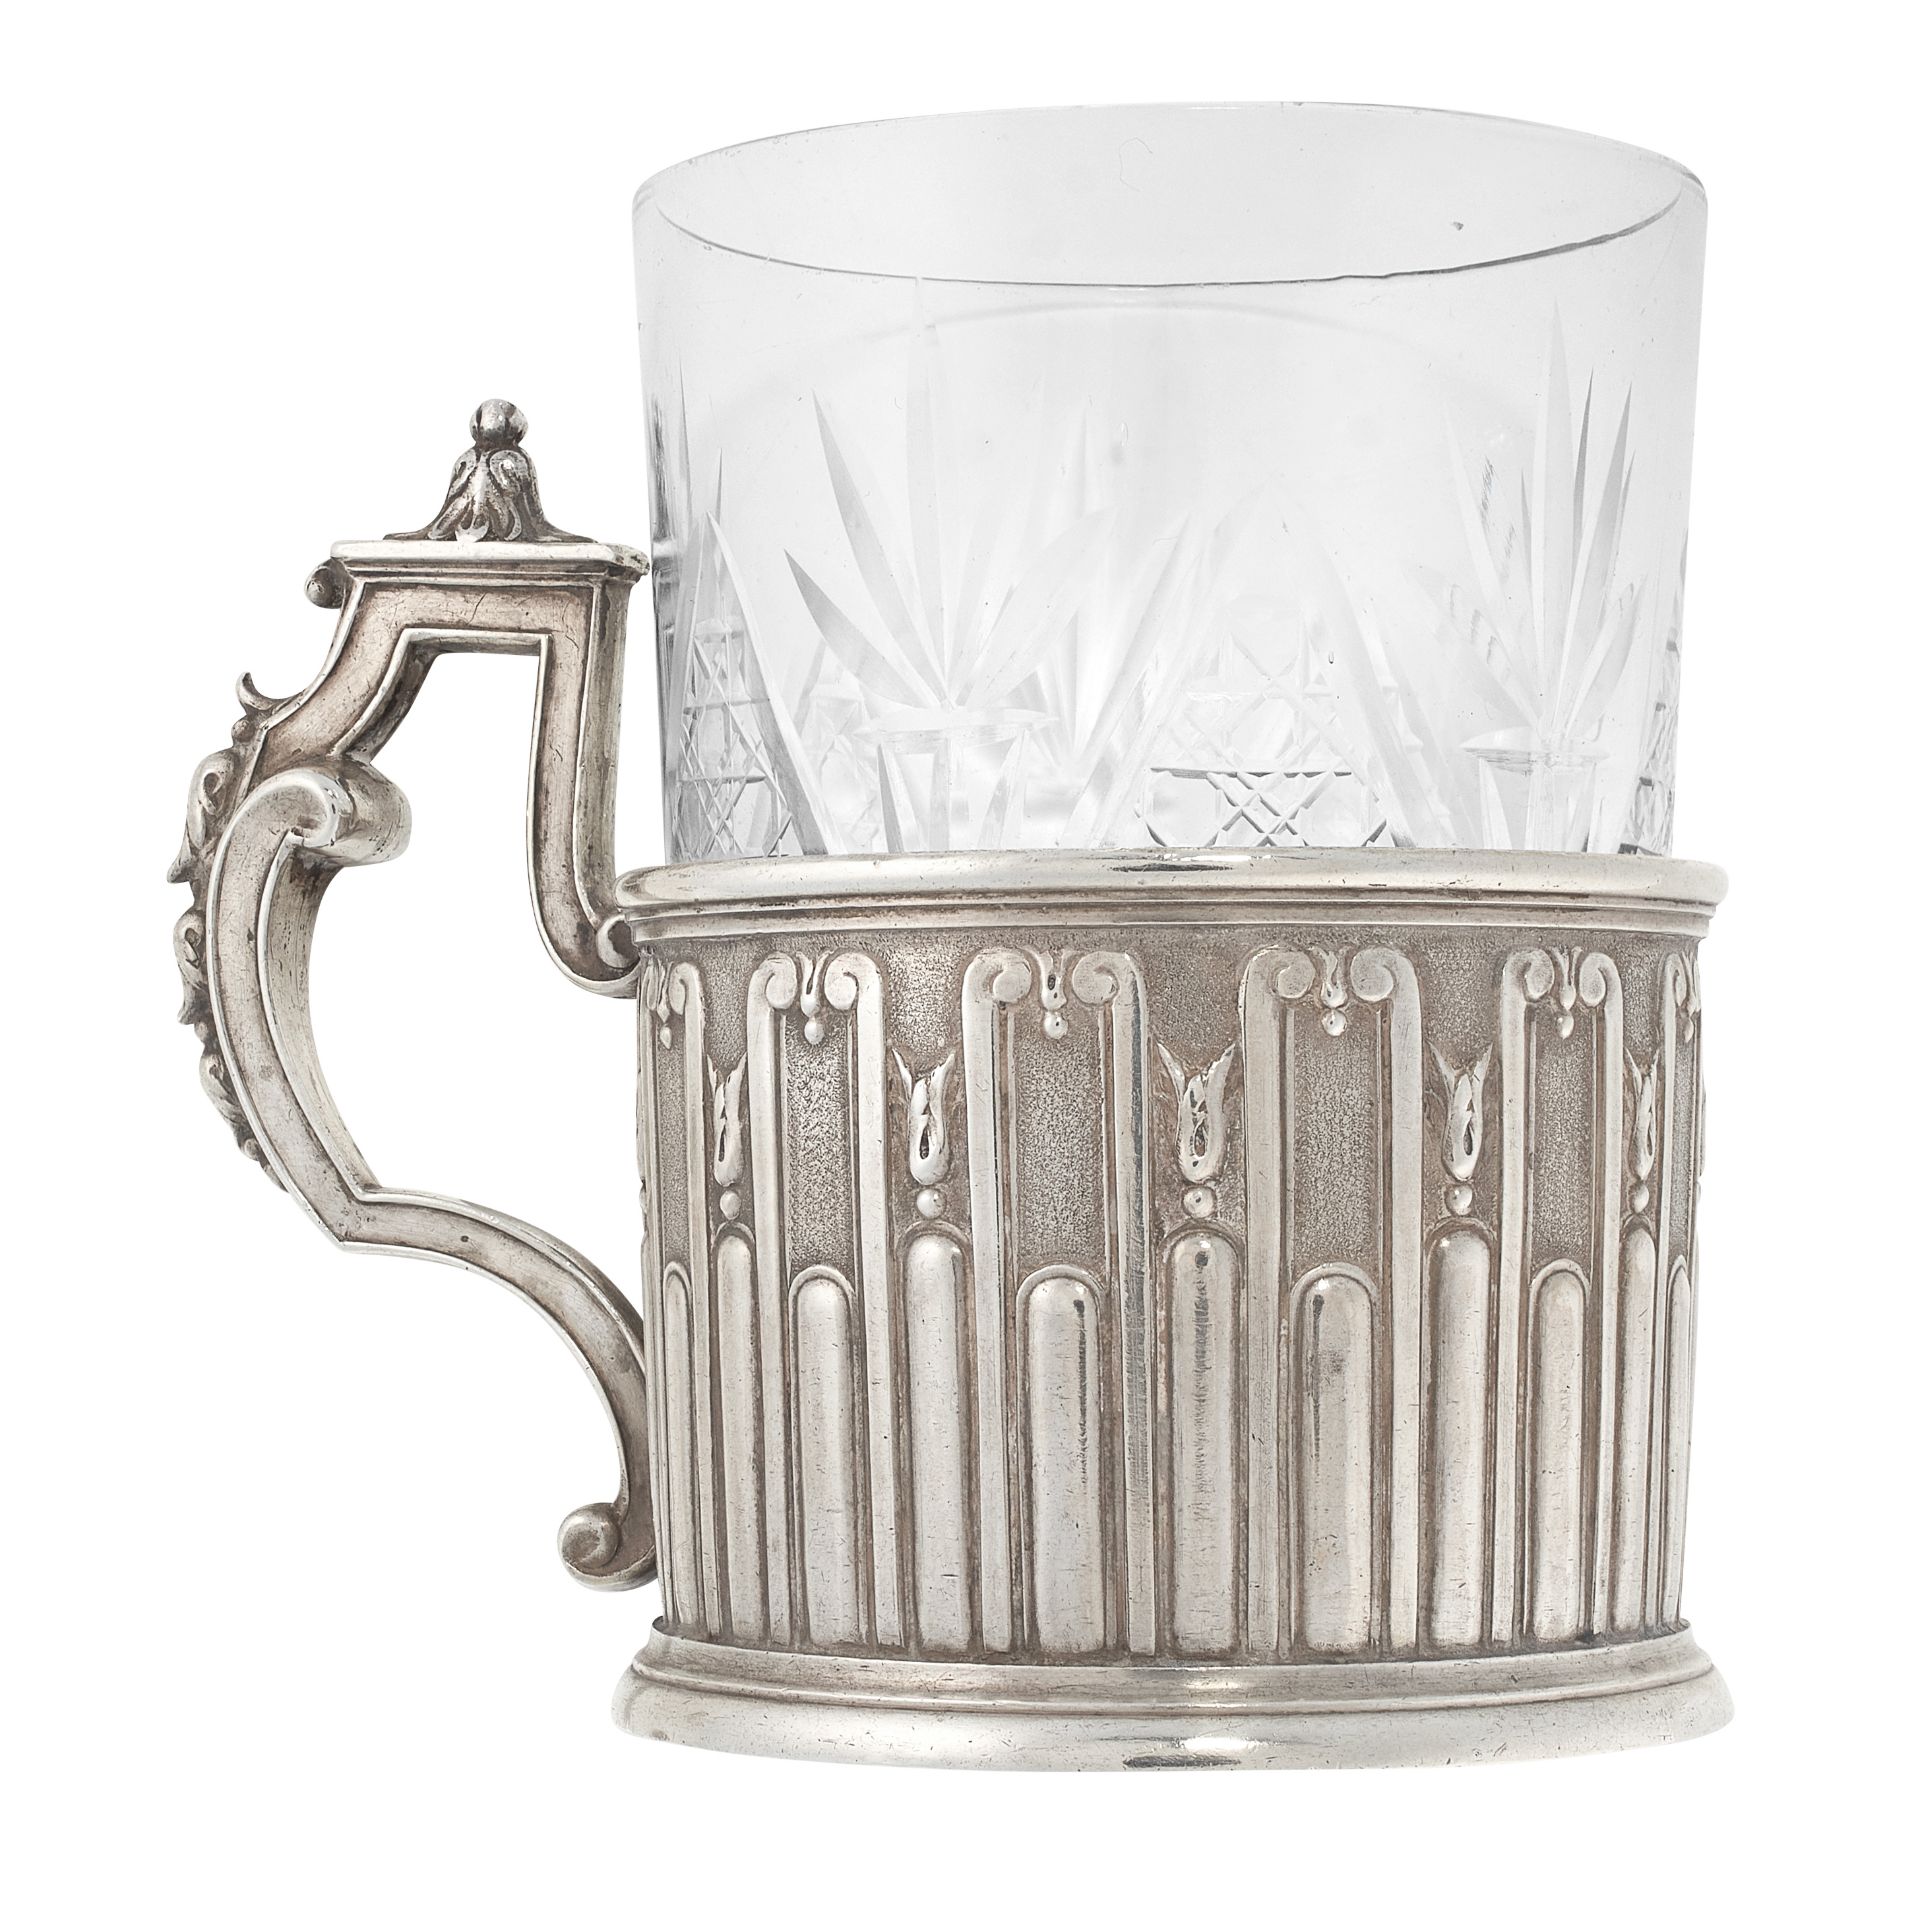 AN ANTIQUE IMPERIAL RUSSIAN TEA GLASS HOLDER, FABERGE MOSCOW CIRCA 1900 in 84 zolotnik silver, the